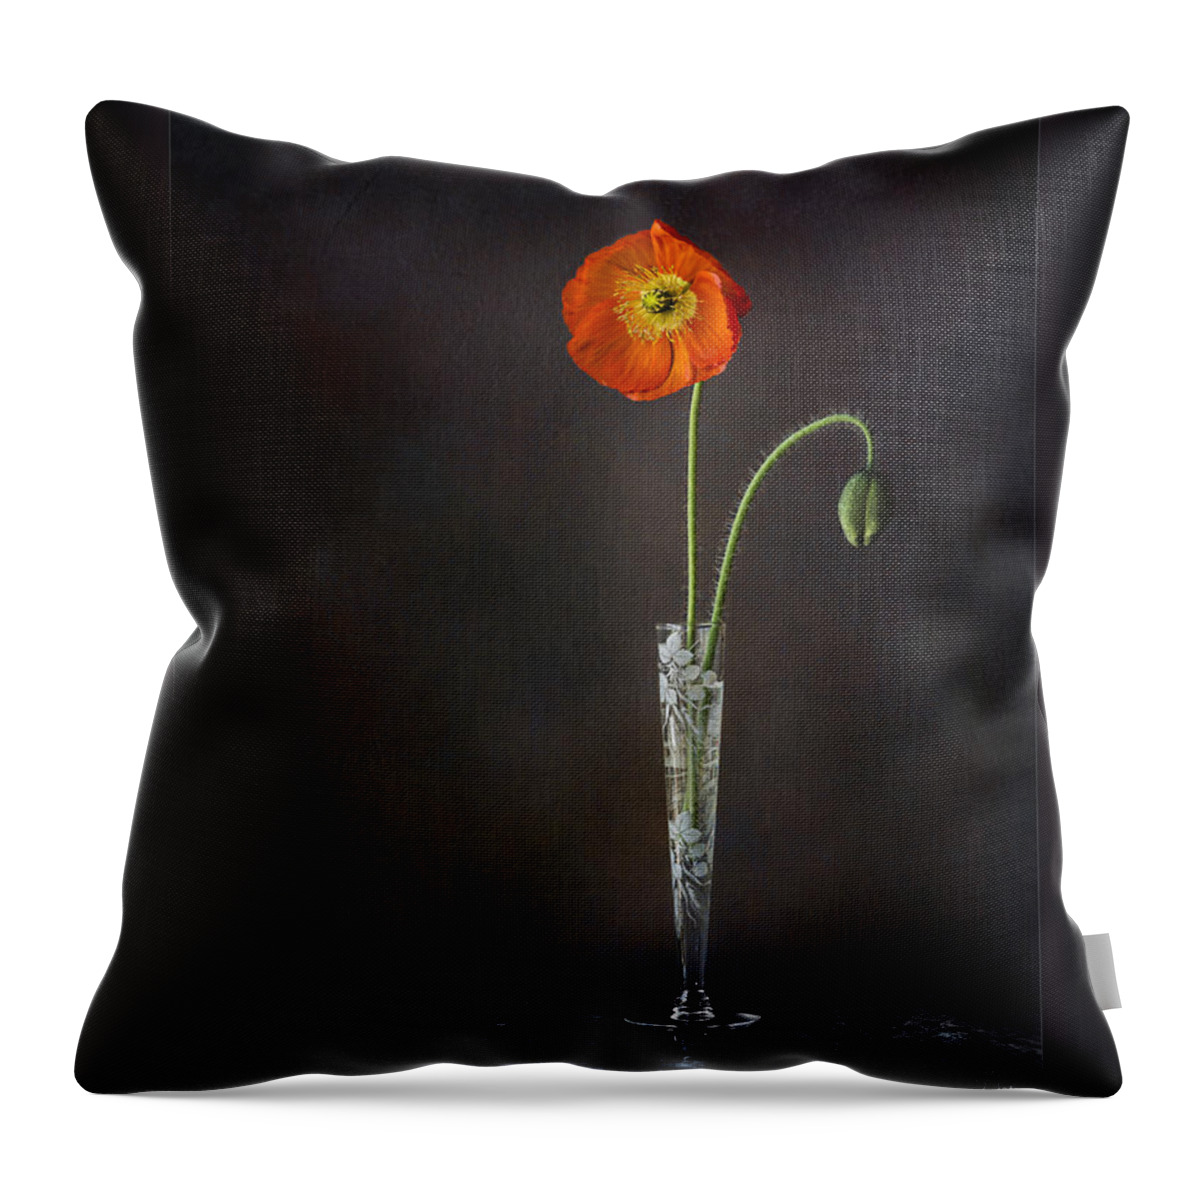 Flower Throw Pillow featuring the photograph Poppy In Vase by Endre Balogh